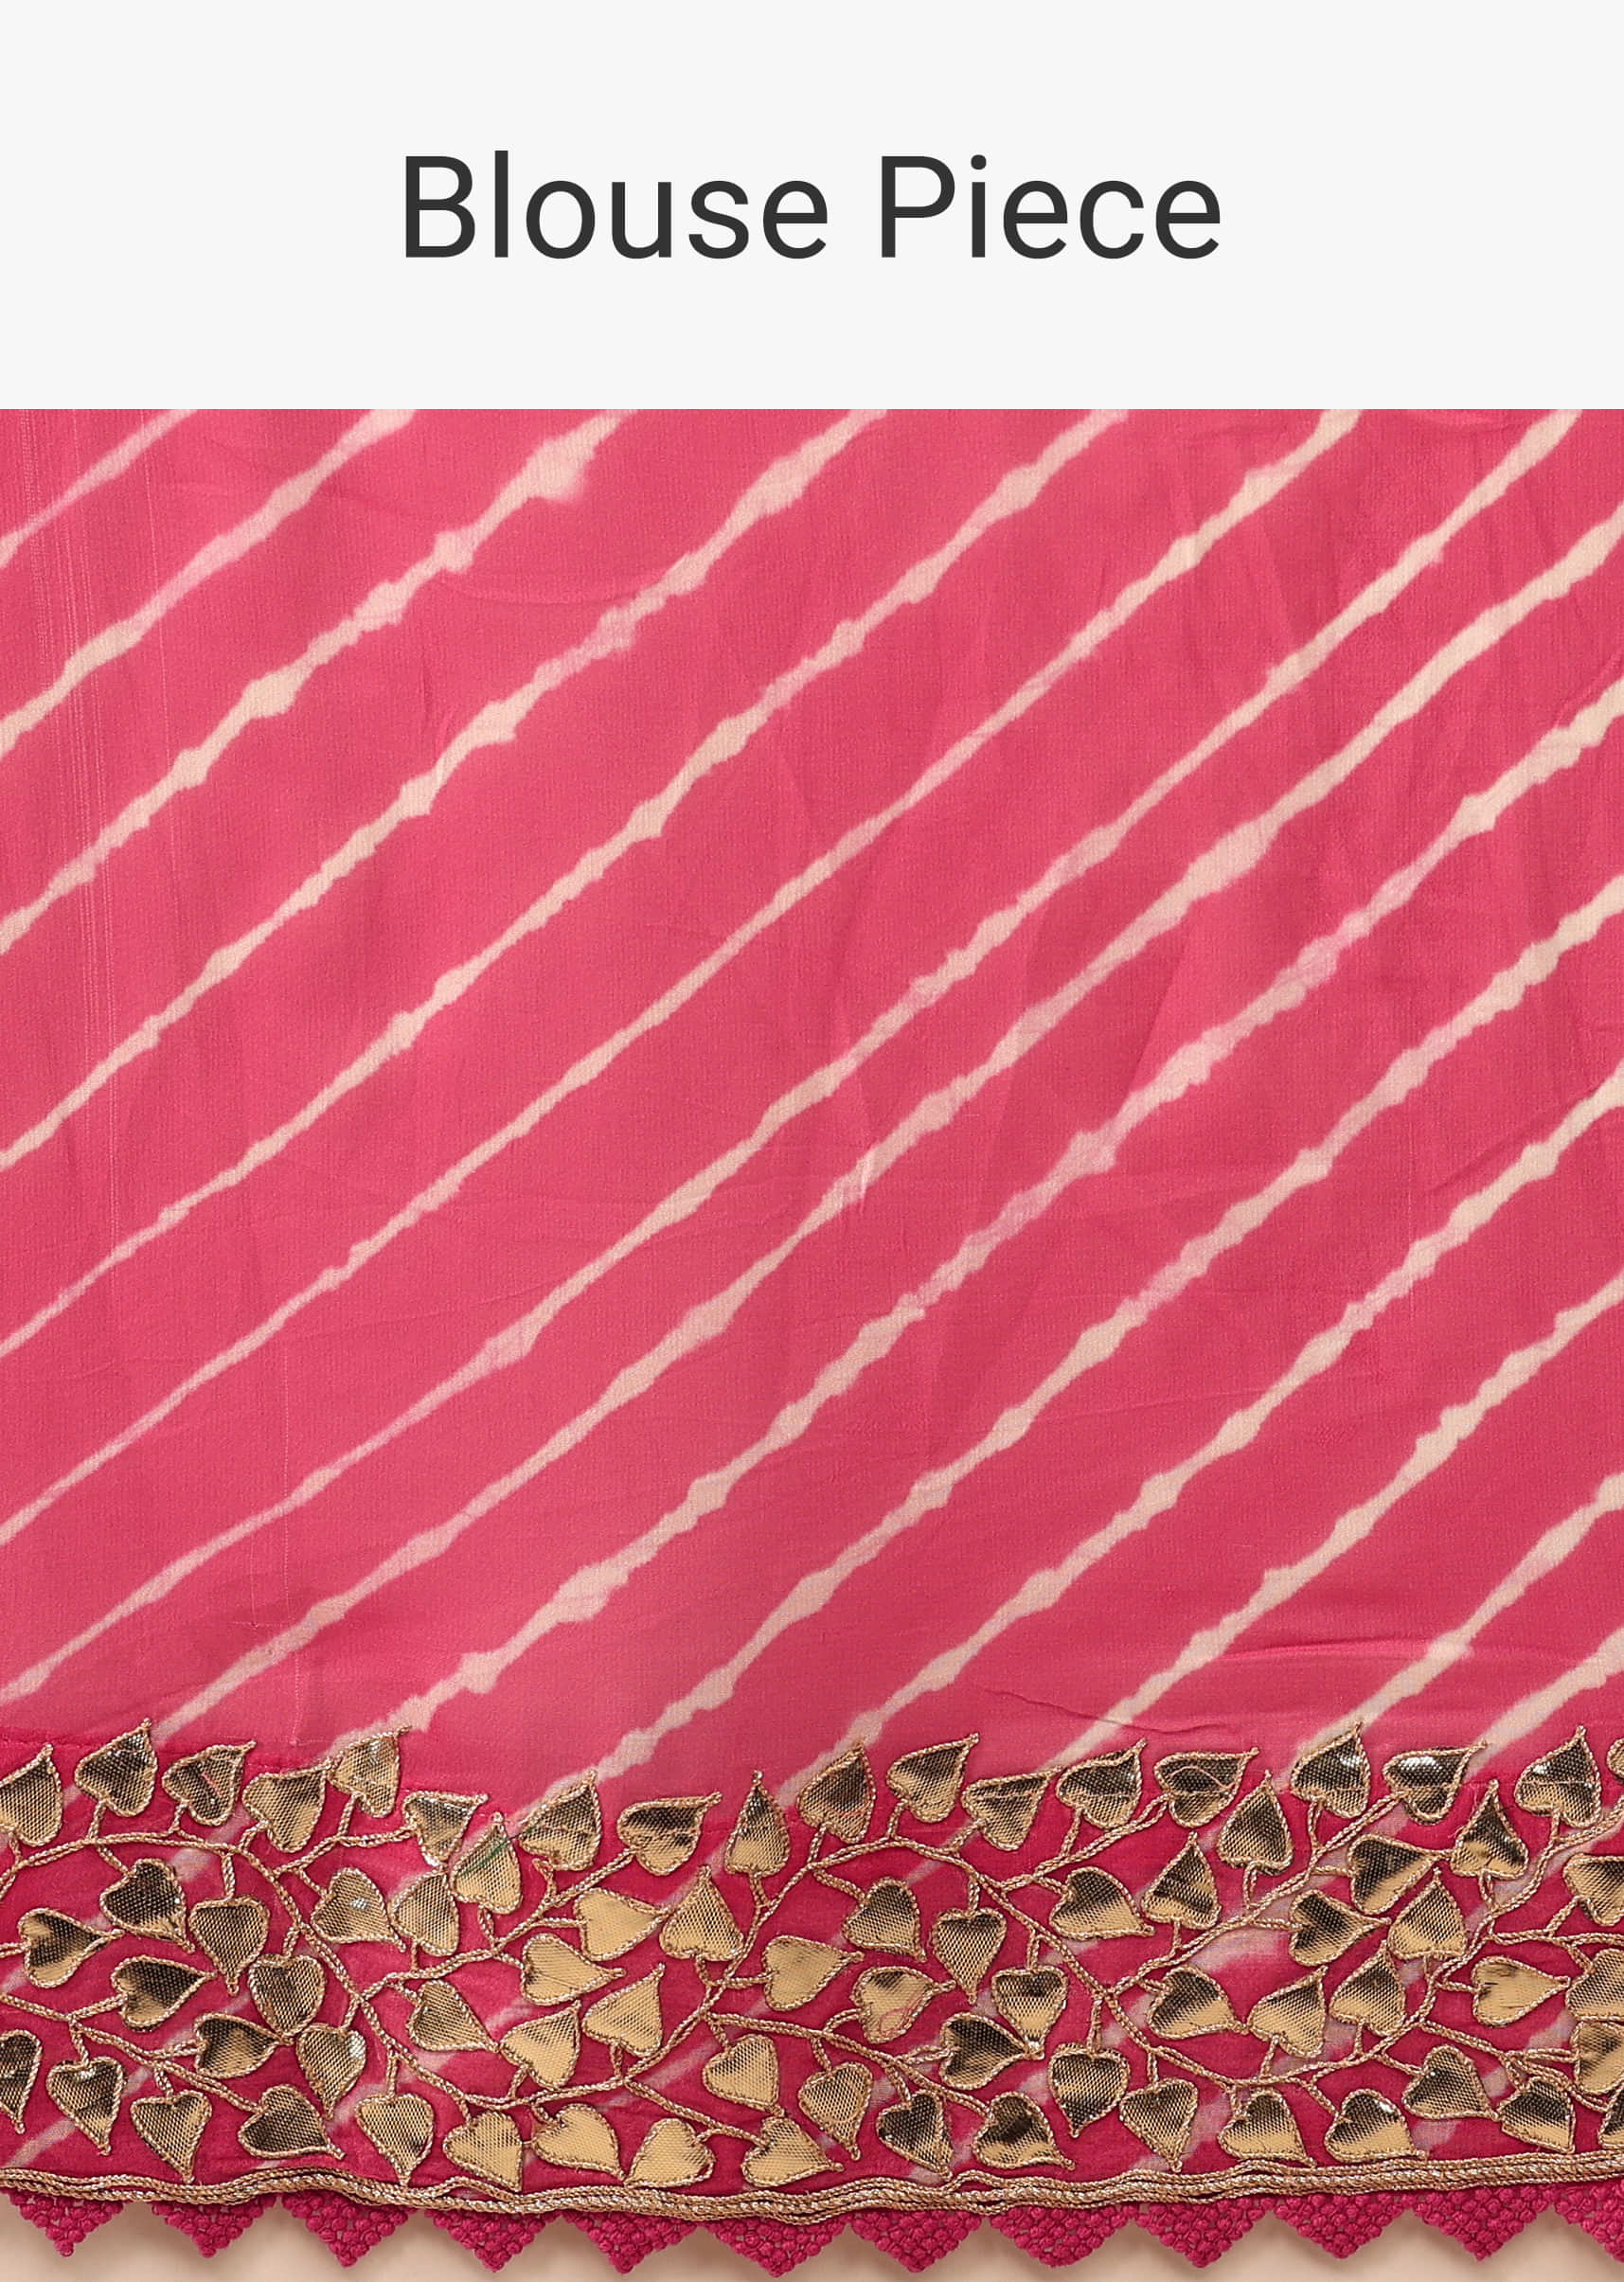 Raspberry Pink Bandhani Saree In Organza With Embroidery